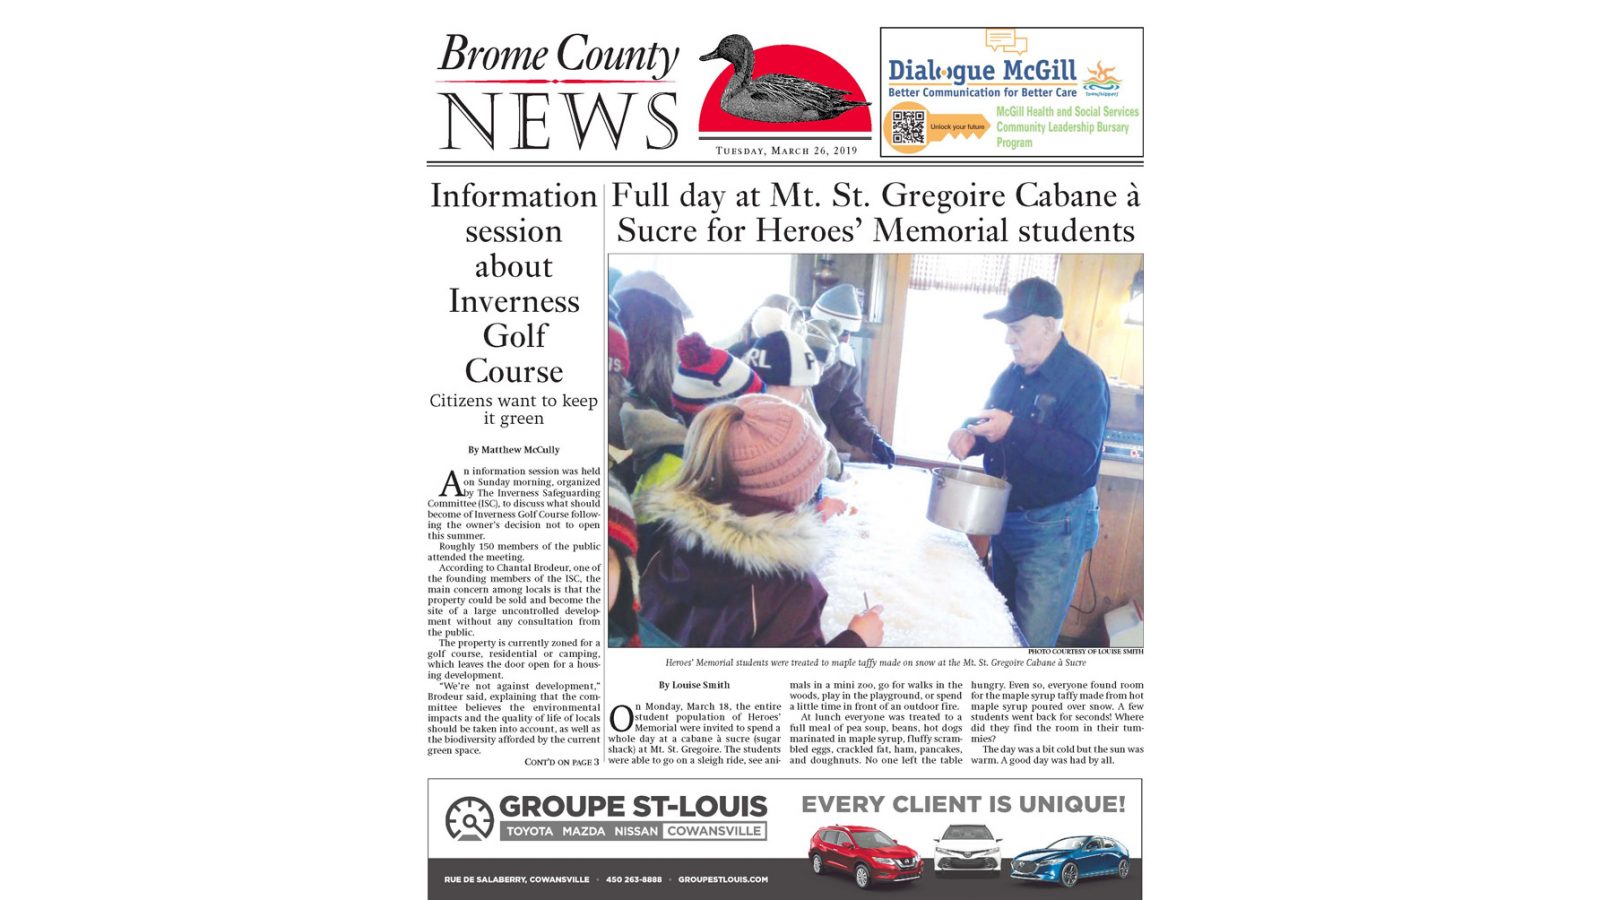 Brome County News – March 26, 2019 edition